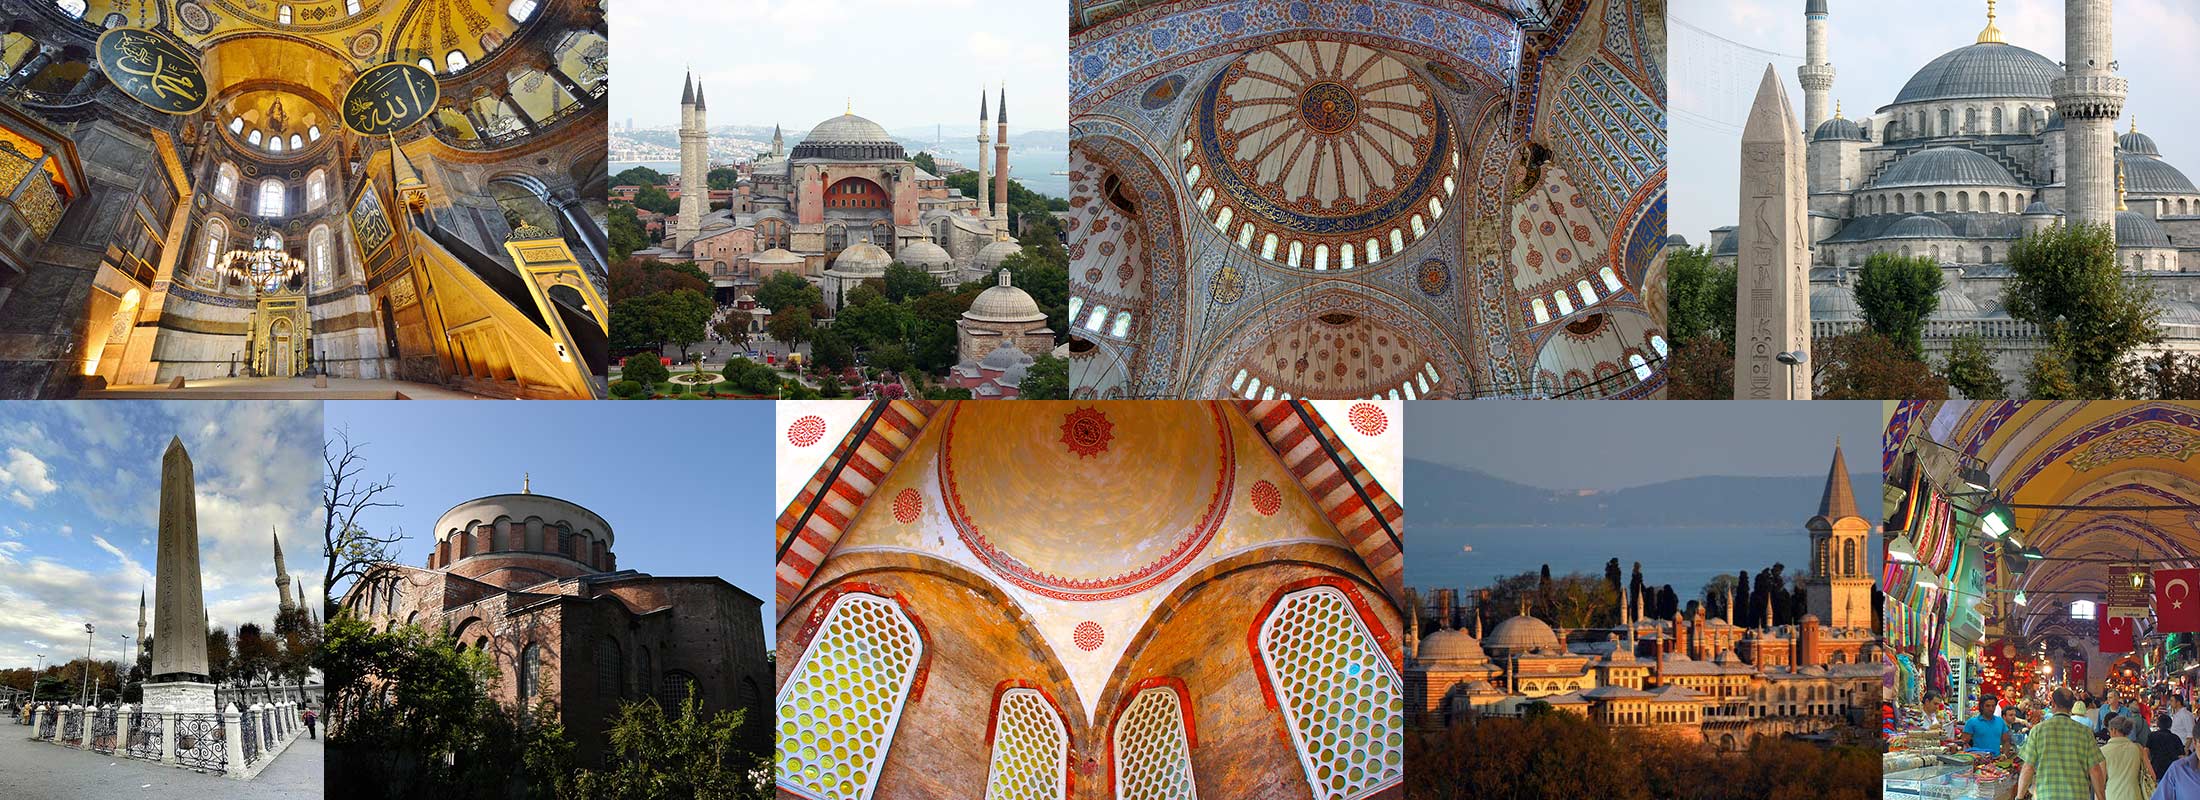 heritages-of-ottoman-and-byzantine-classic-istanbul-tour-hagia-sophia-museum-blue-mosque-topkapi-palace